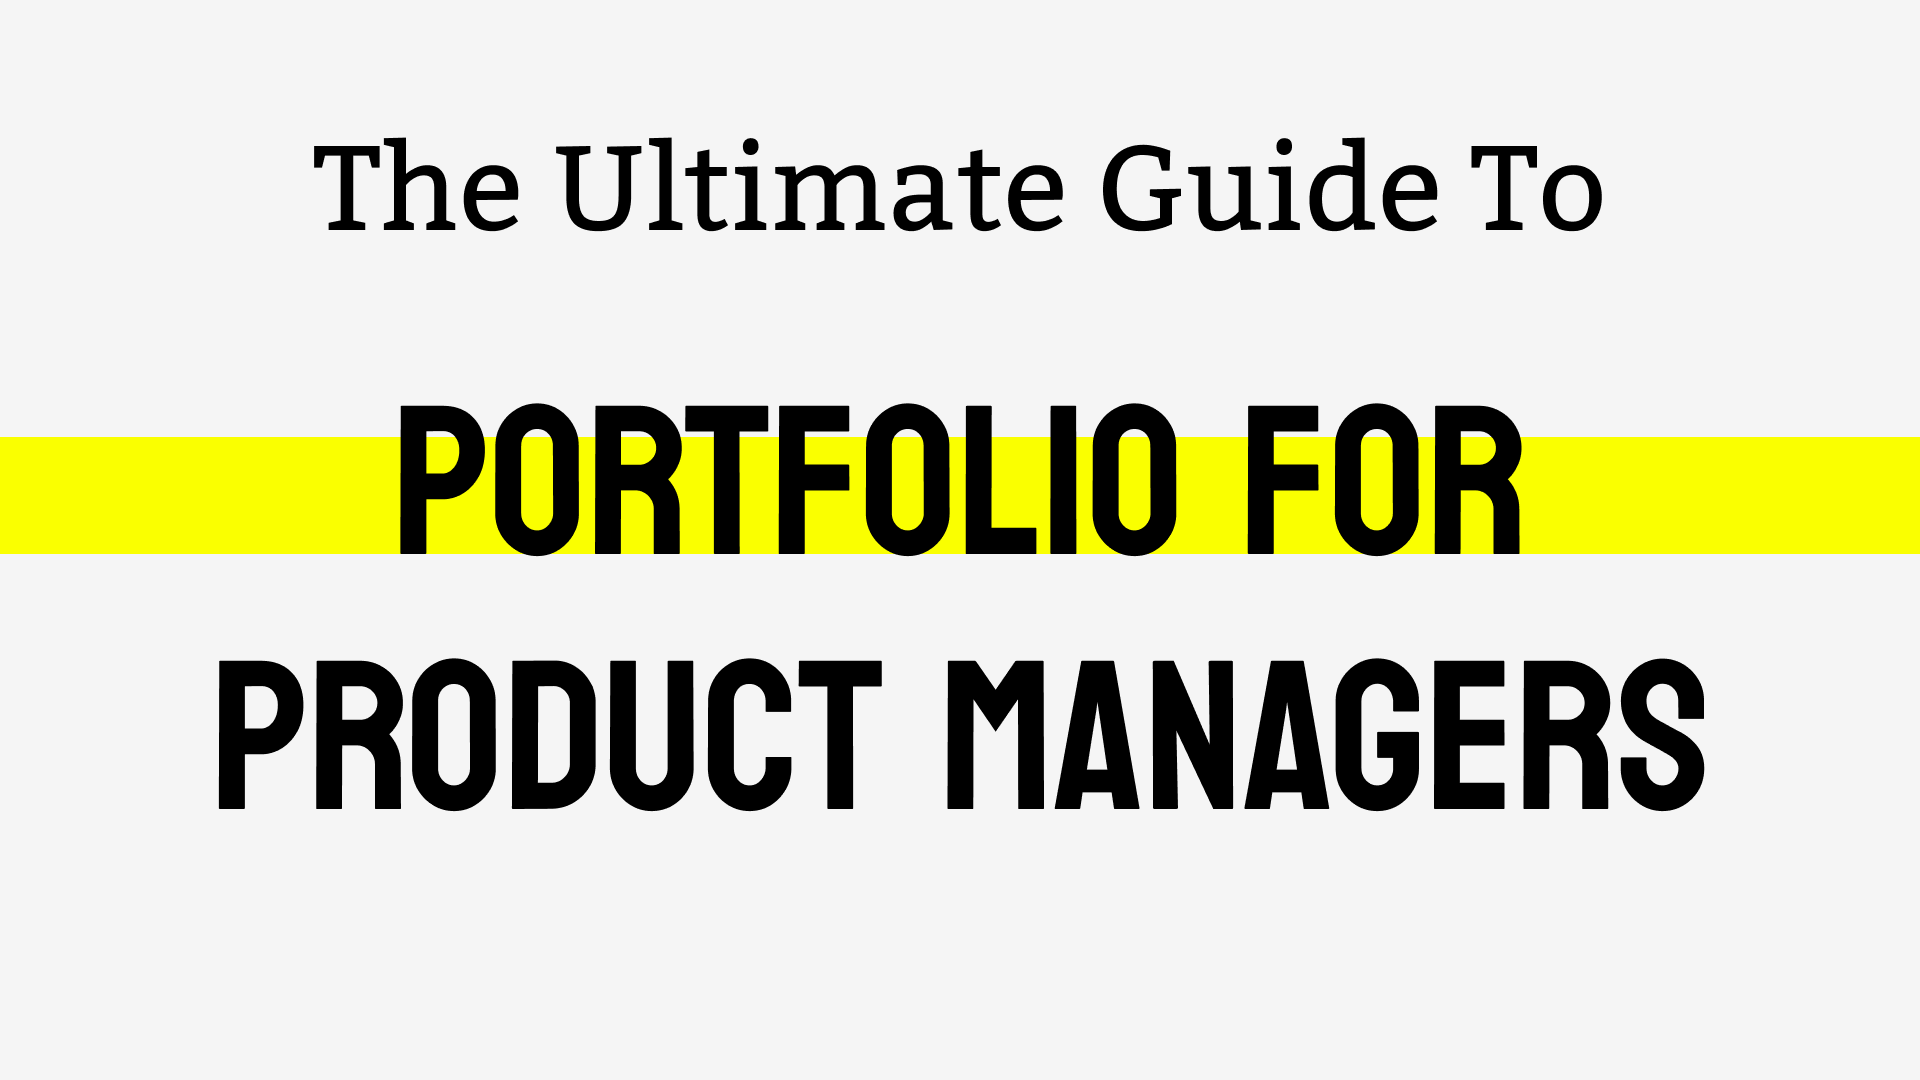 How to make a Product Manager Portfolio – The complete guide with Examples, Tools, Templates, and Free Resources